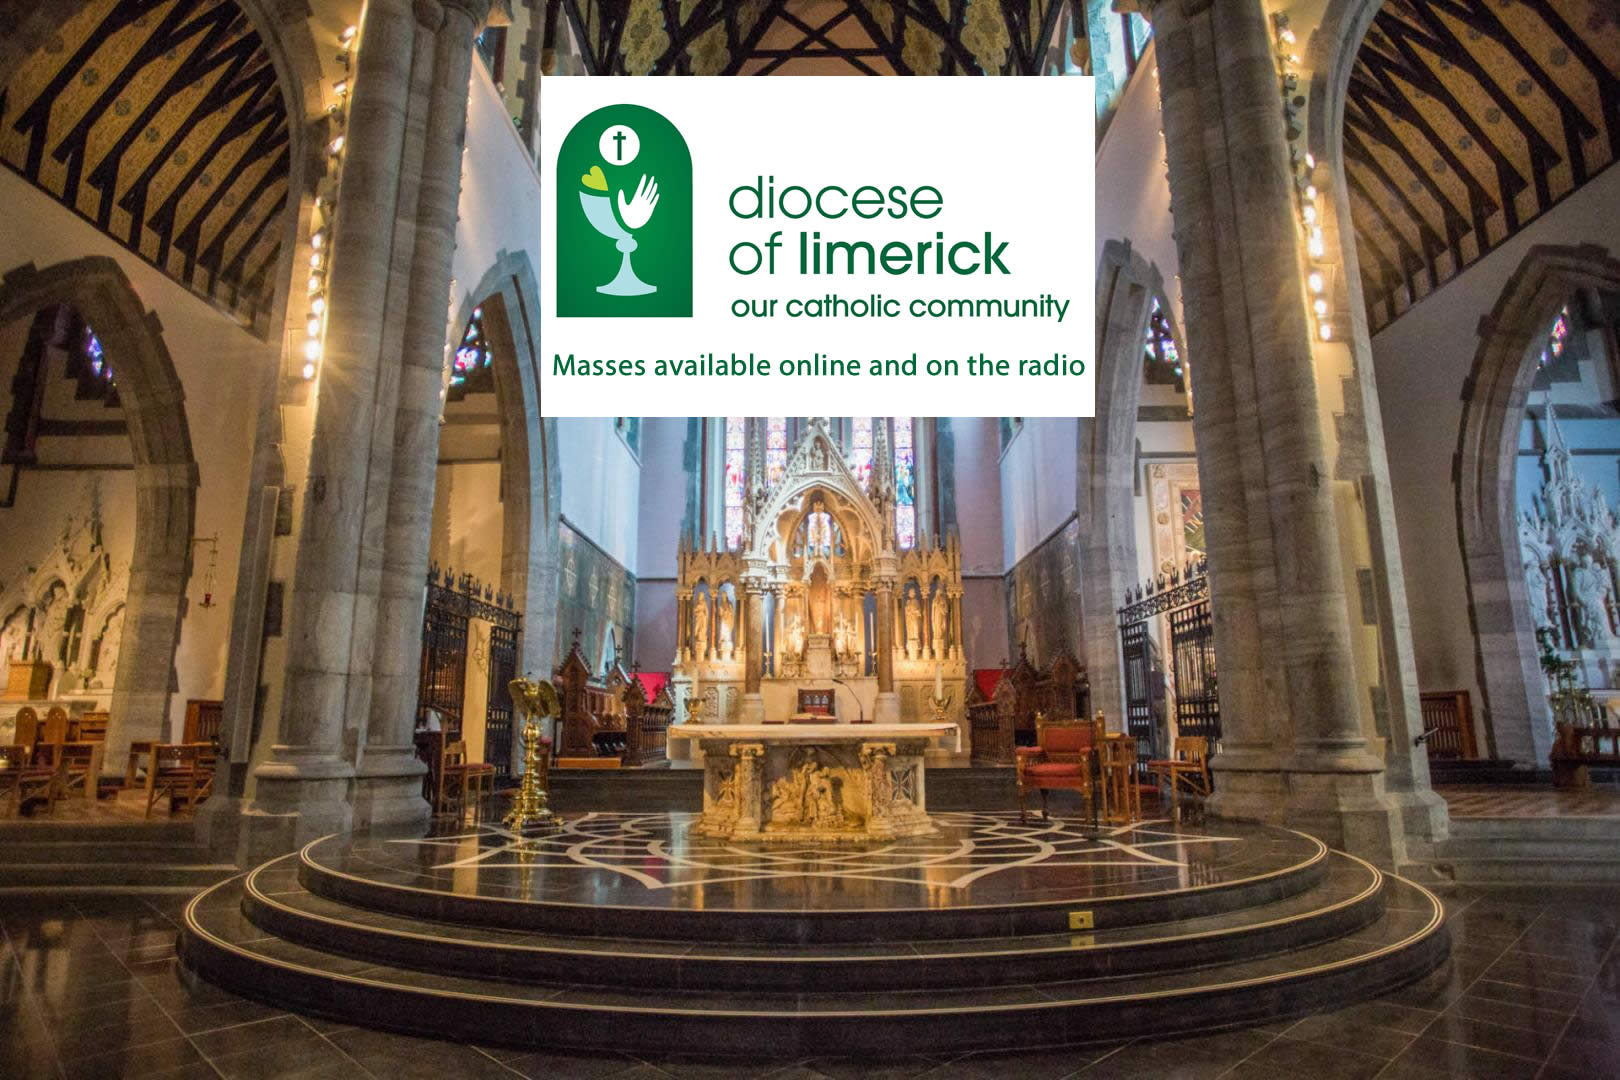 Masses available online and on the radio  in the Diocese of Limerick